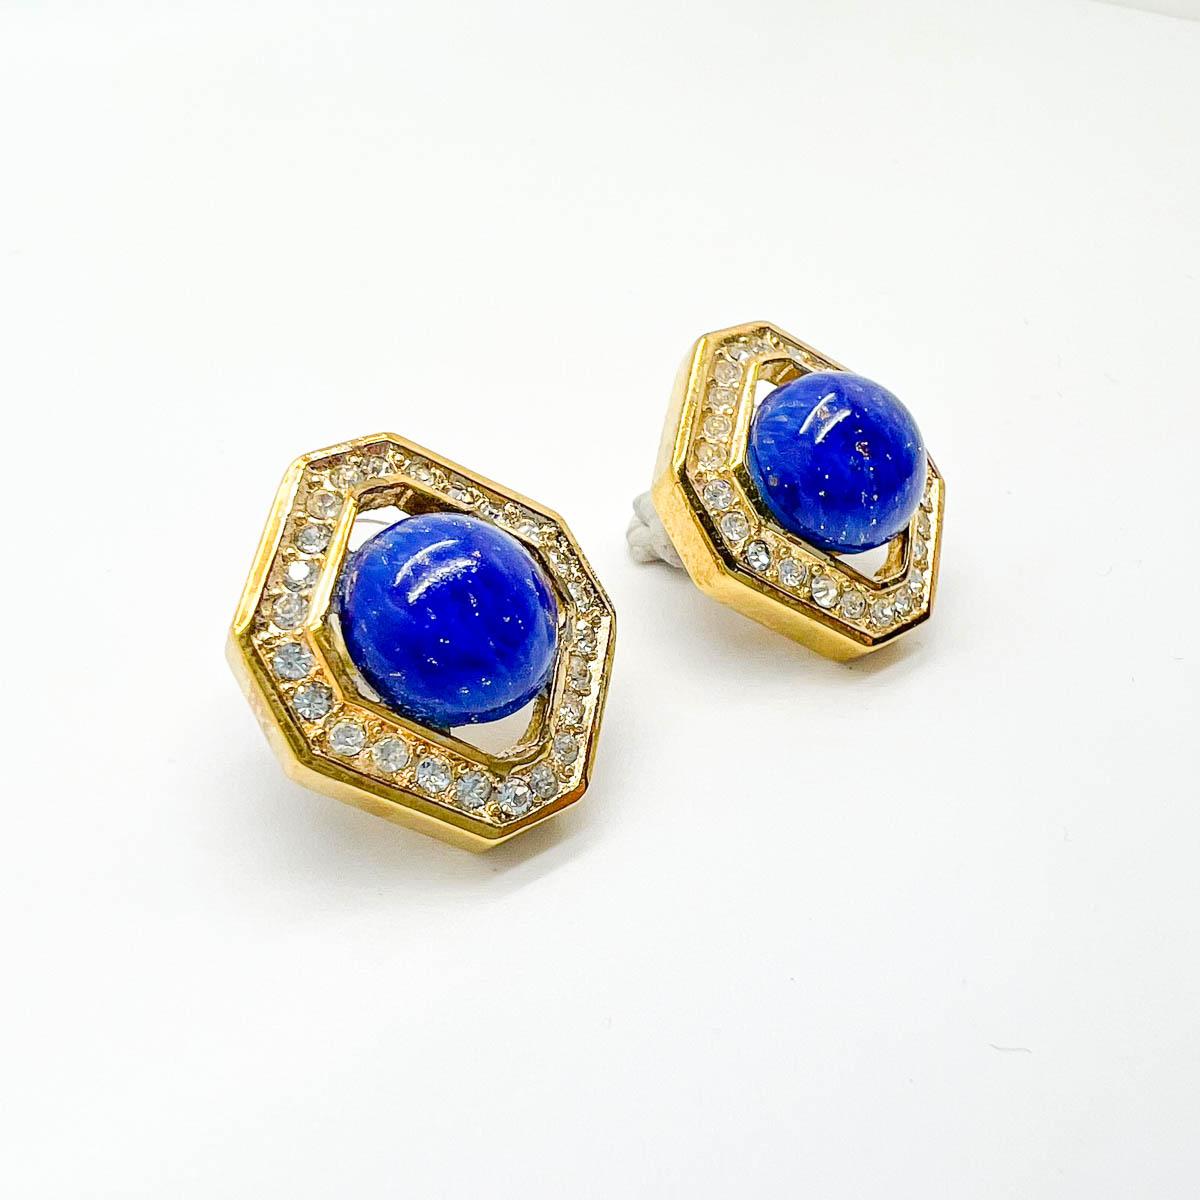 Vintage Dior Lapis Earrings. Emulating lapis lazuli and diamonds these beautiful Dior creations are a timeless style statement that will add an elegant finishing touch every wear.
With archive pieces from her own Dior collection displayed in